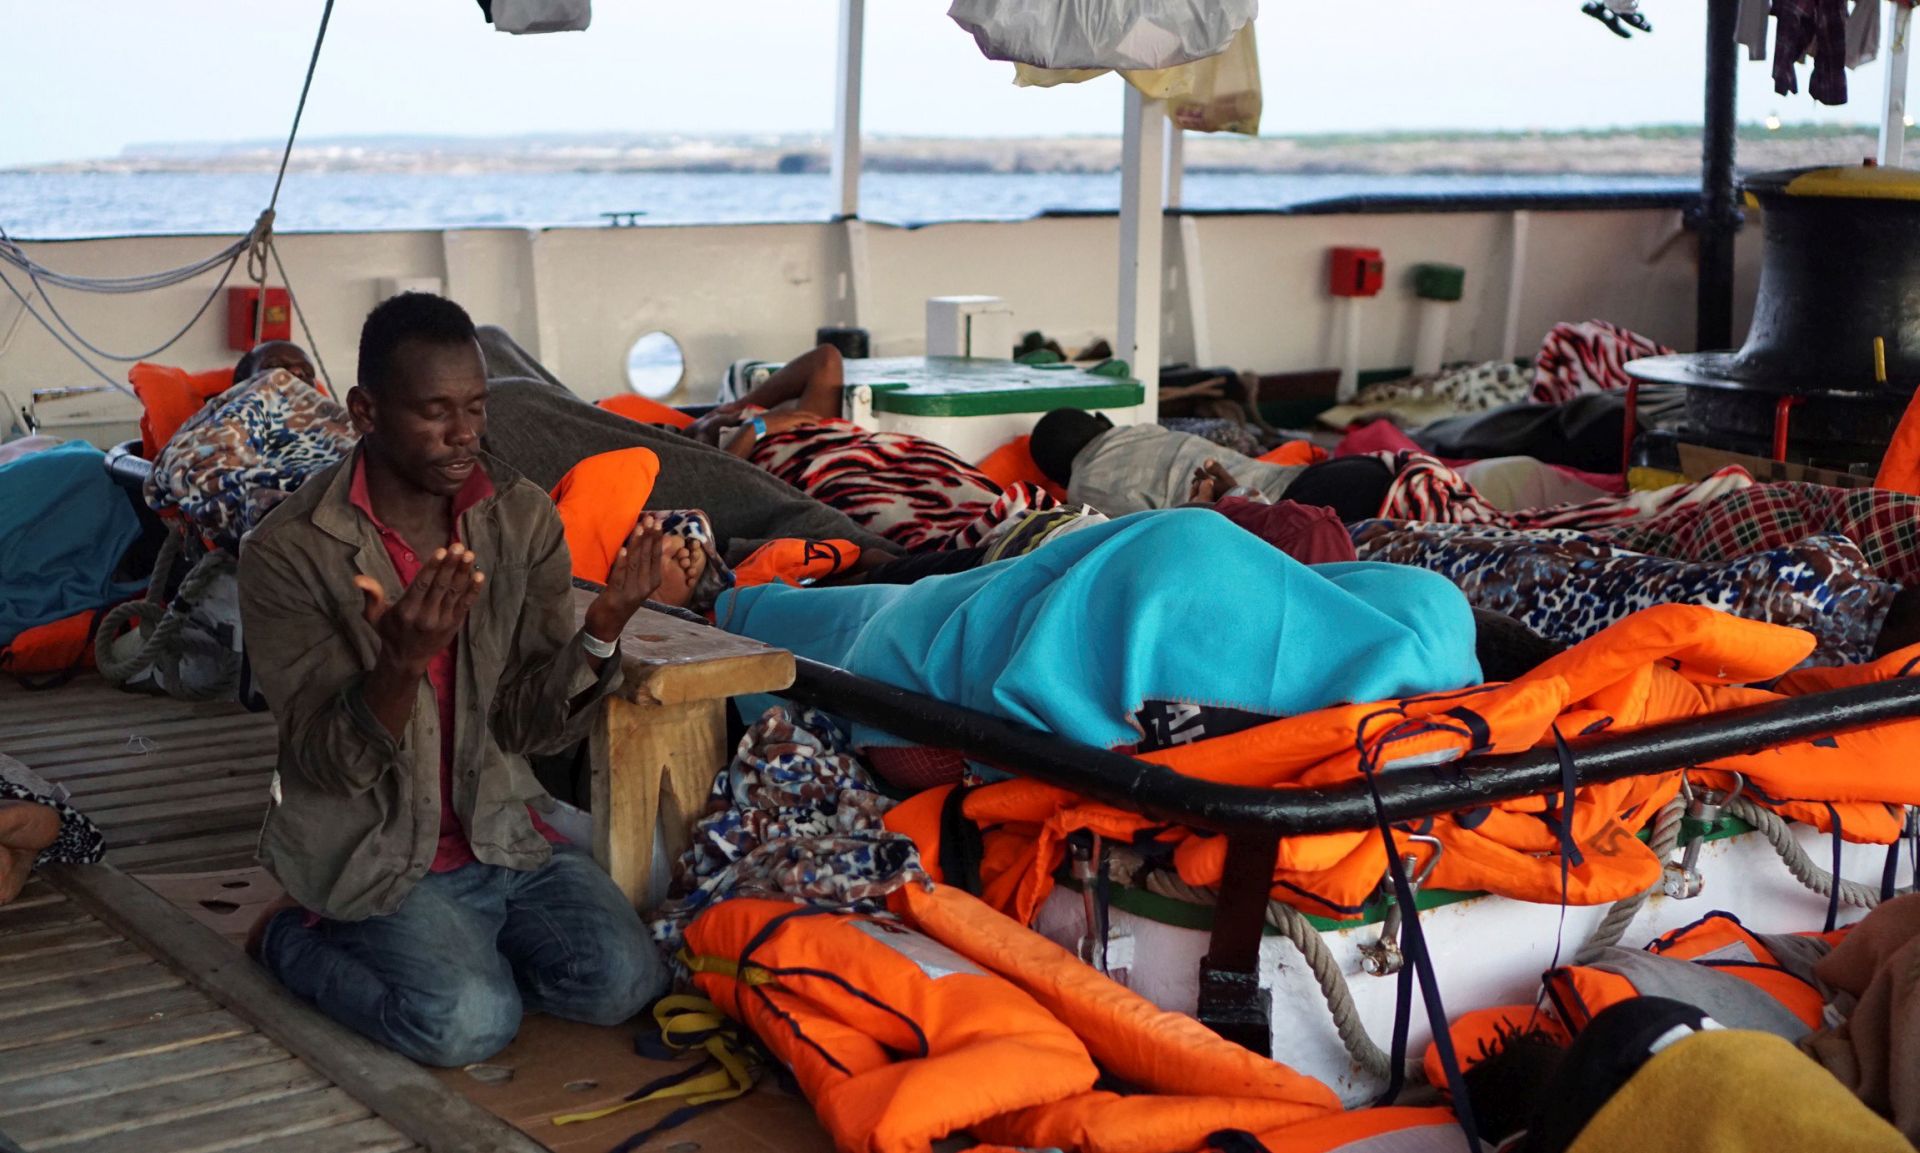 epa07780159 A migrant, one of the 107 on board the Spanish rescue vessel Open Arms, prays during morning hours, off Lampedusa Island, southern Italy, 19 August 2019. Two days after 27 minors and sick migrants were evacuated, the rescue vessel continues stranded off the coast of Italy as it waits to reach a safe port in the Mediterranean sea, despite the Lazio Regional Administrative Court accepted its appeal, suspending the ban on entry into Italian waters ordered by Italian Interior Minister Matteo Salvini.  EPA/FRANCISCO GENTICO